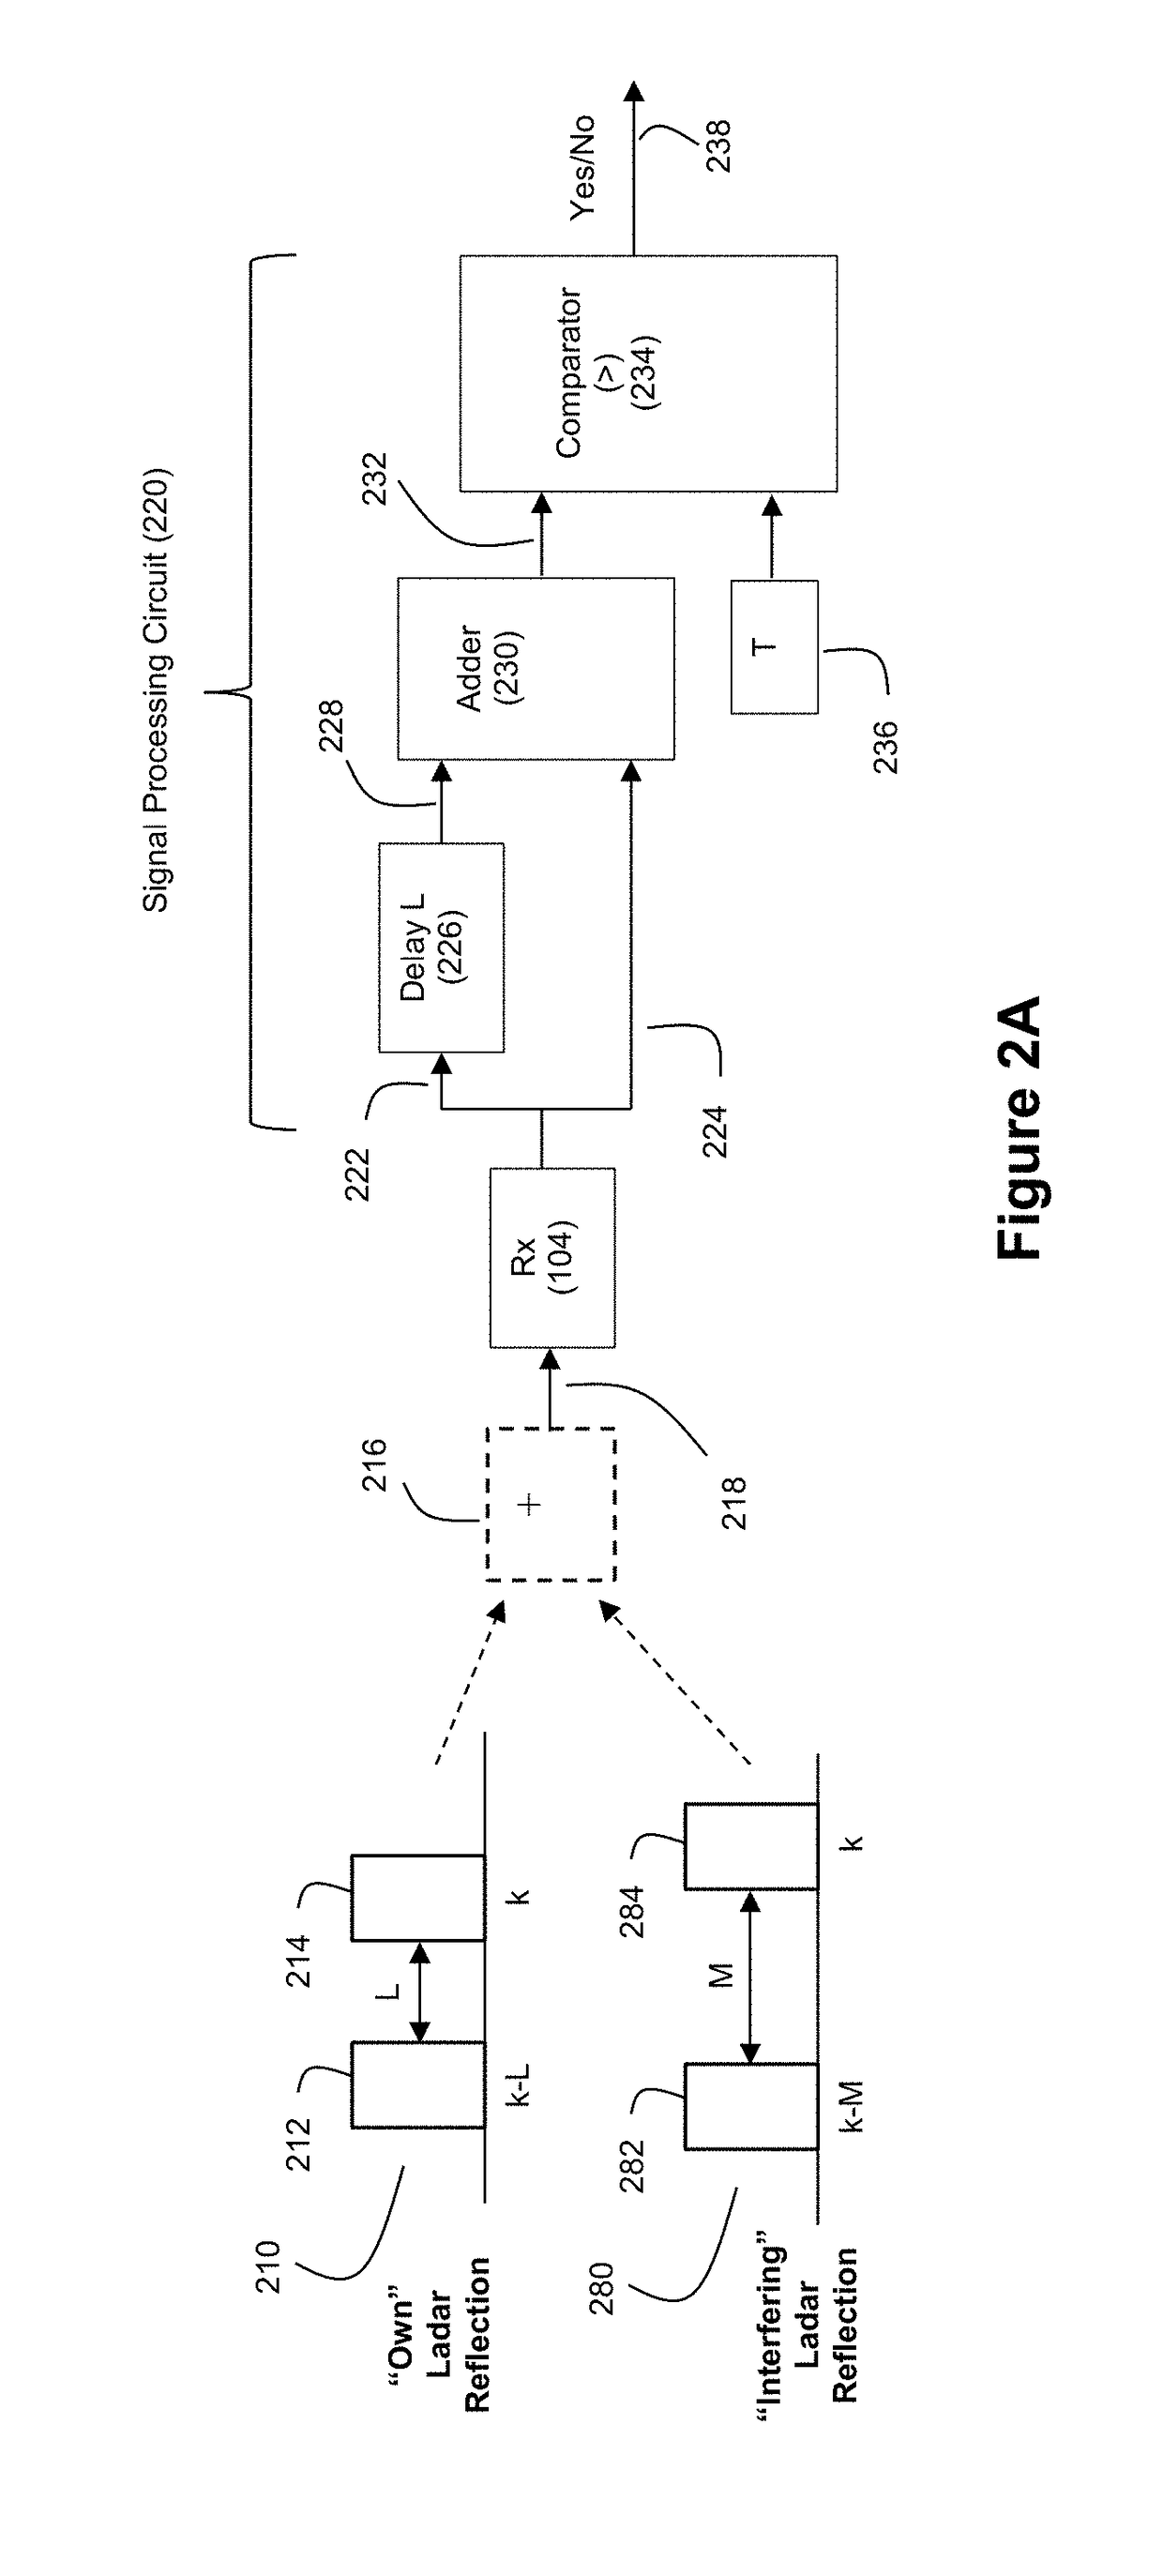 Method and System for Ladar Pulse Deconfliction Using Delay Code Selection